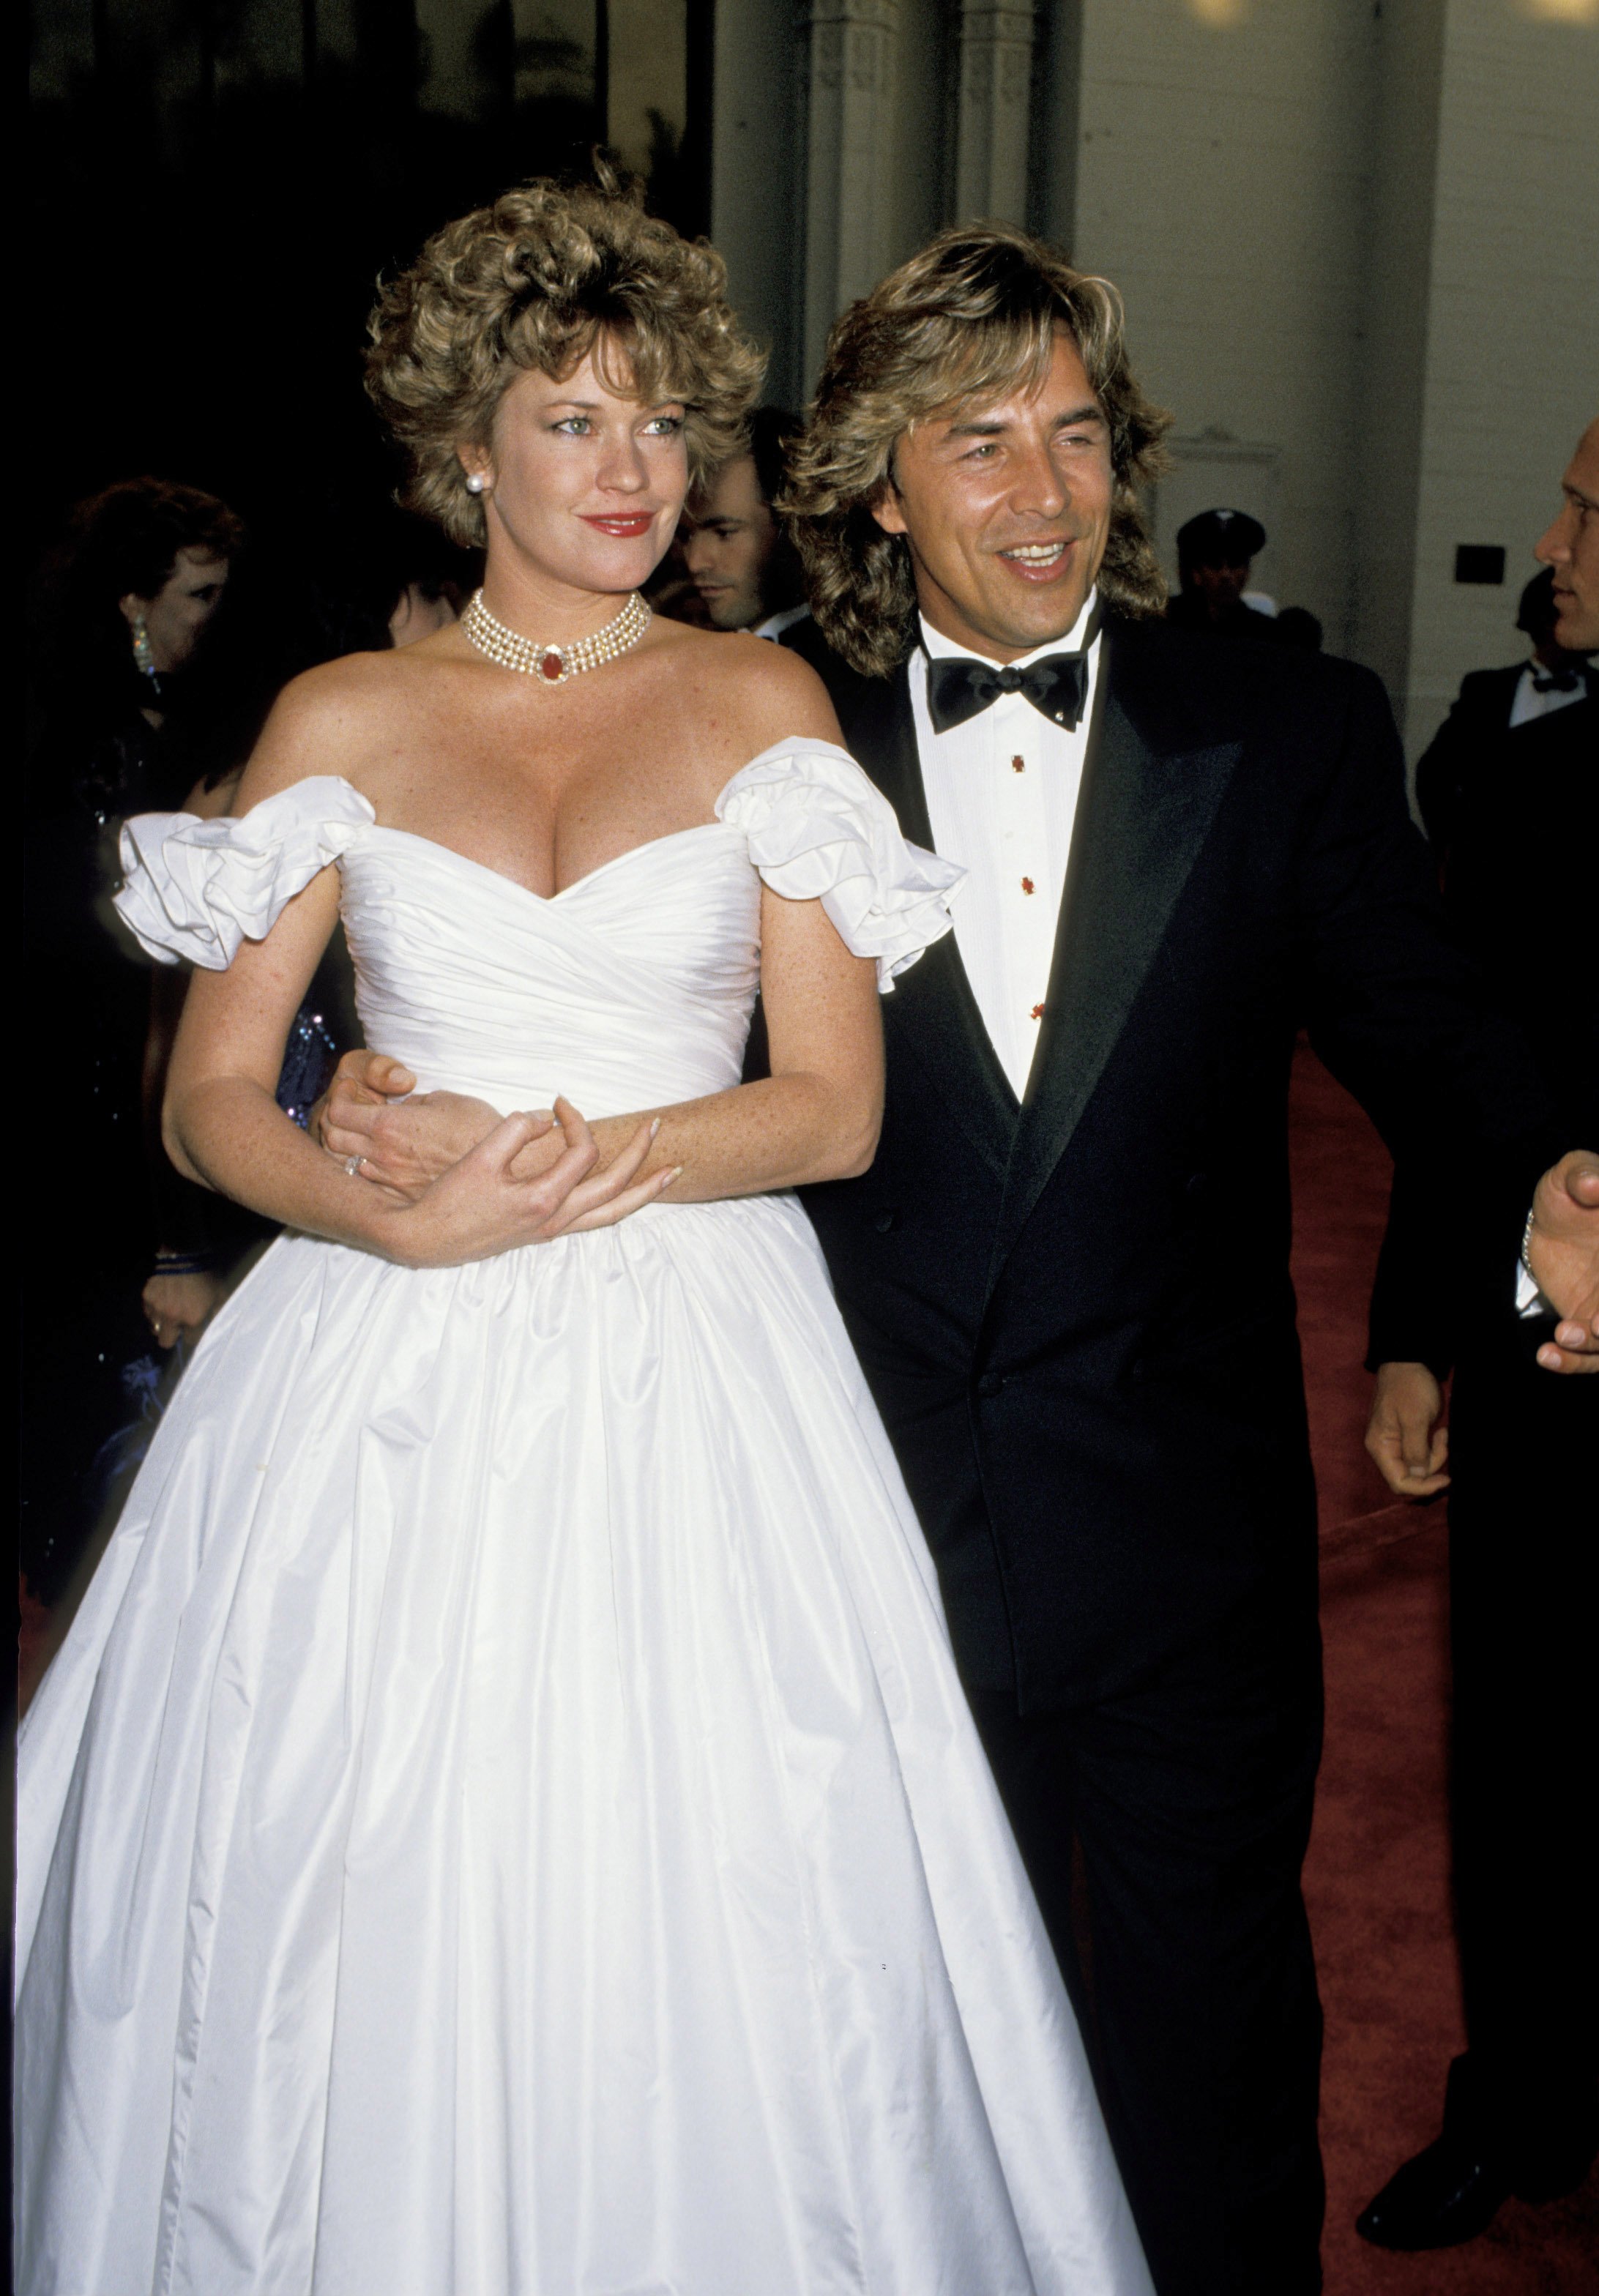 Melanie Griffith and Don Johnson at the 61st Annual Academy Awards on March 29, 1989 | Source: Getty Images